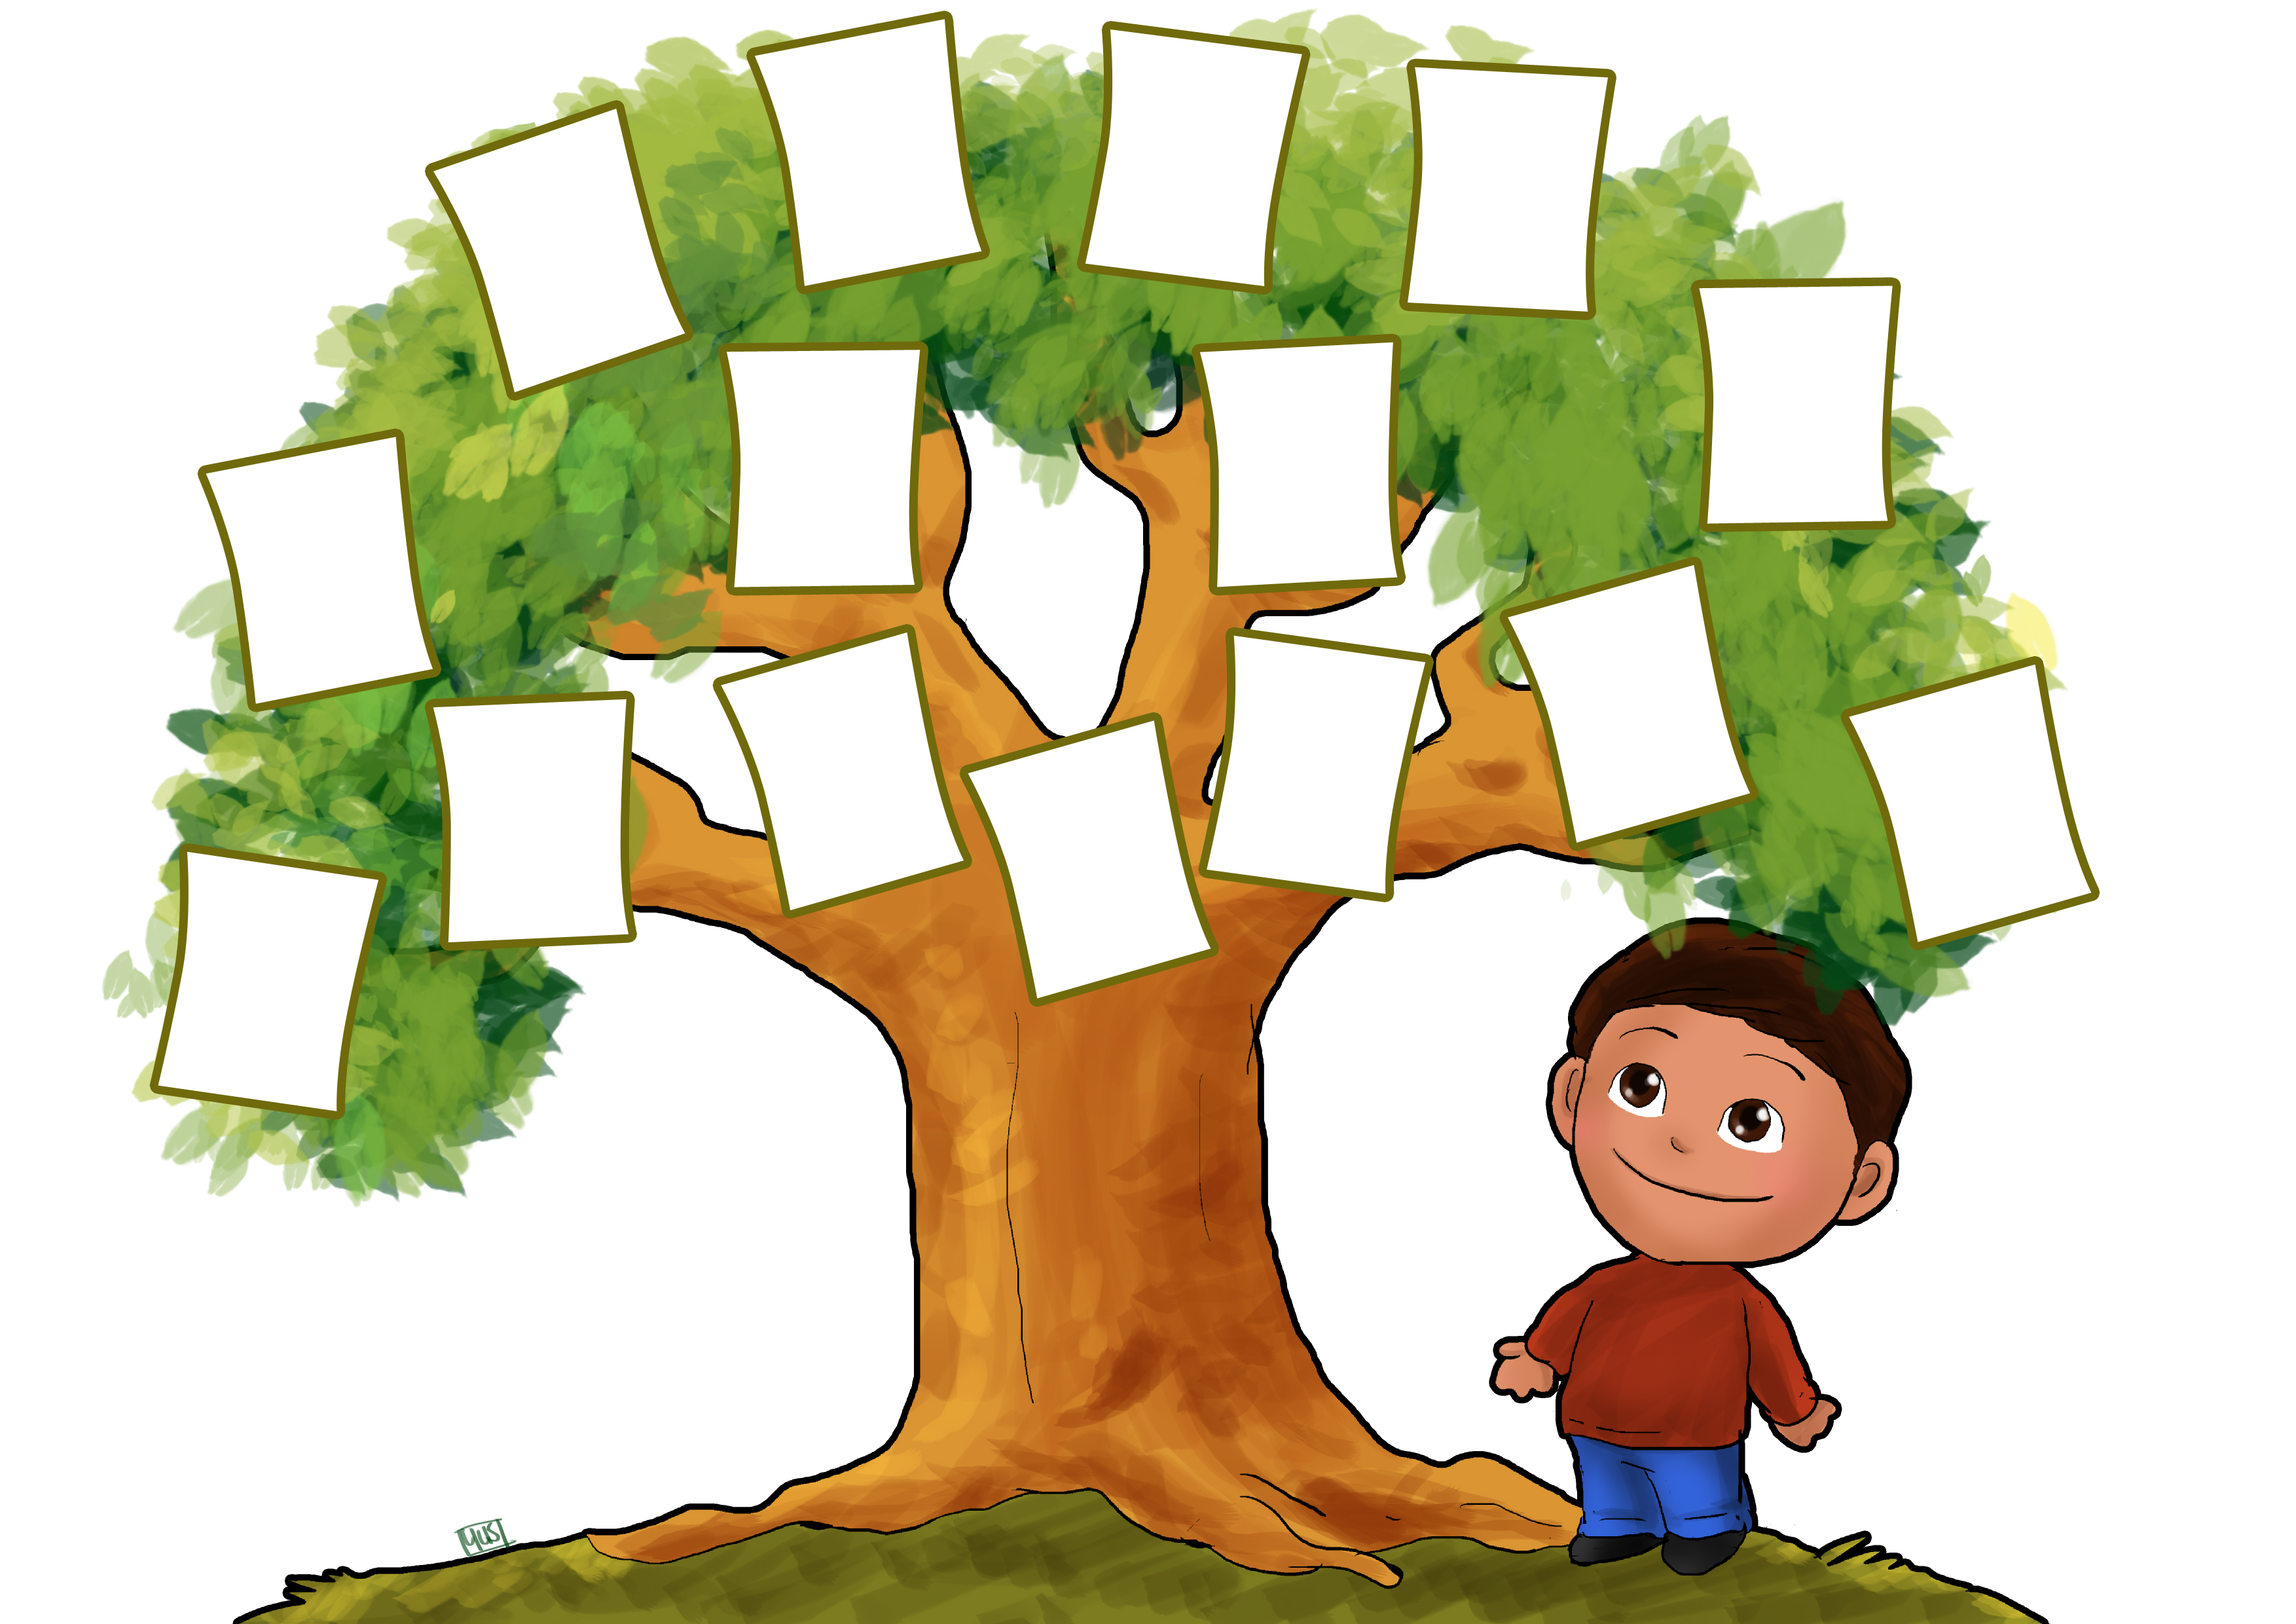 17 Printable Family Tree Free Cliparts That You Can Download To You    